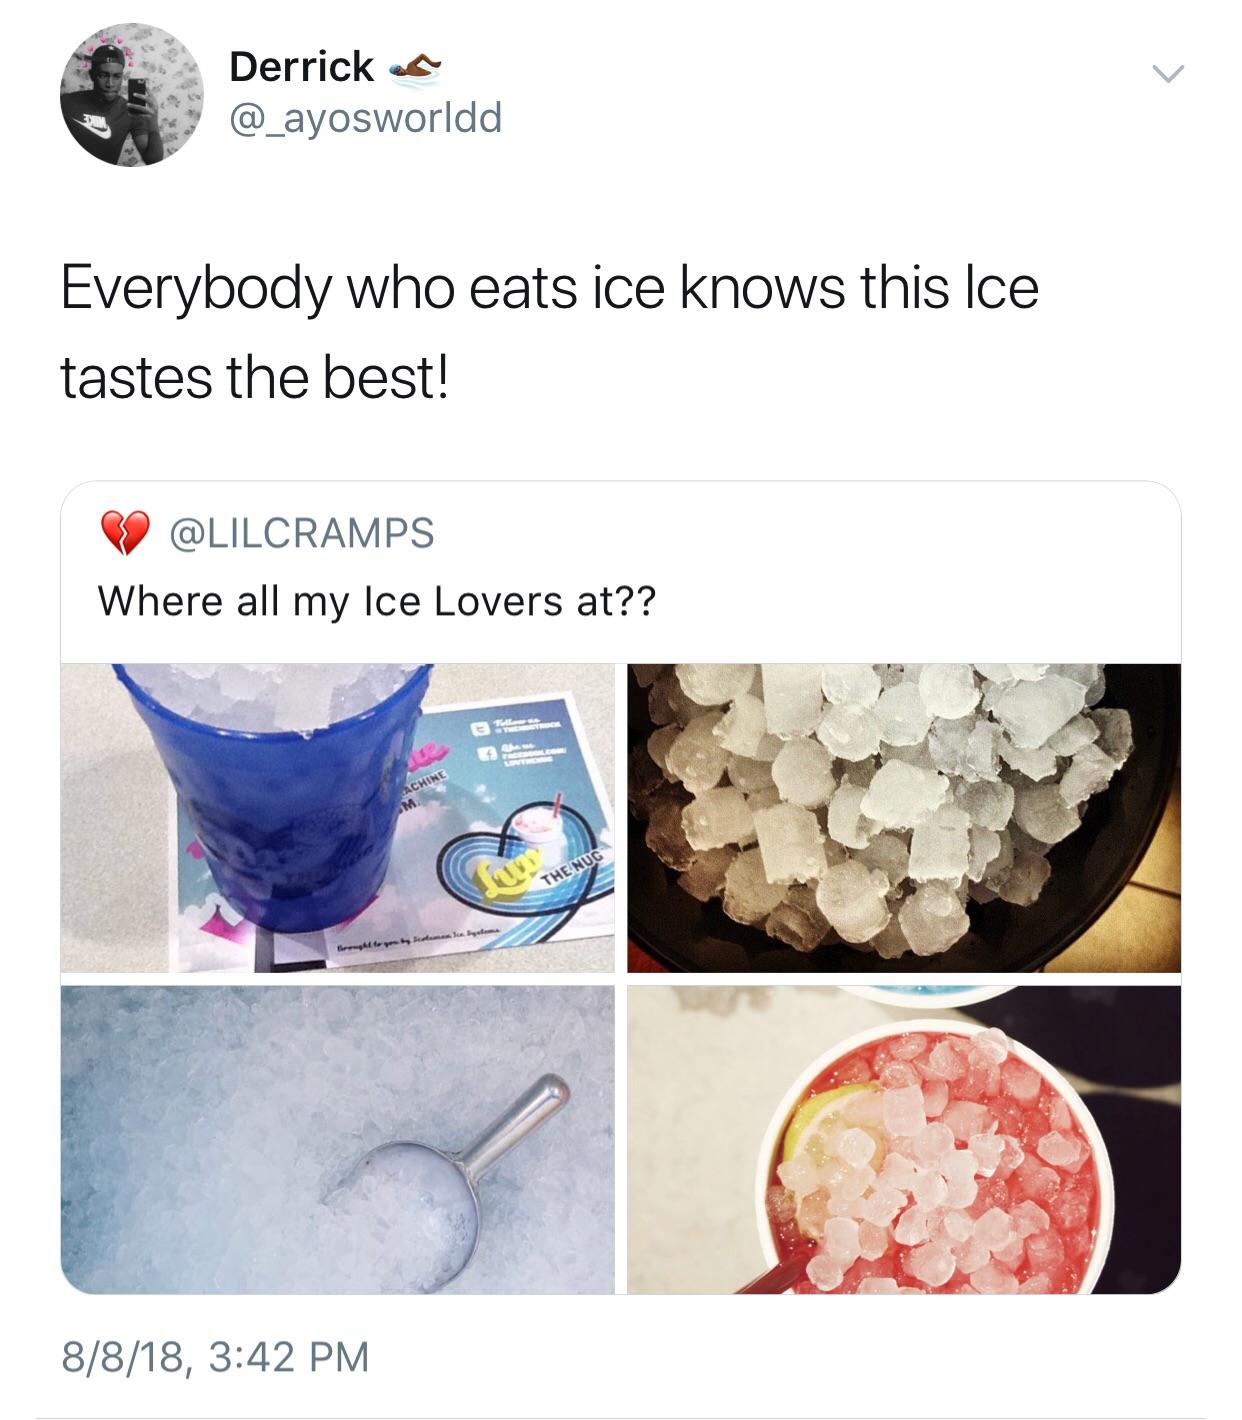 ice lovers - Derrick es Everybody who eats ice knows this Ice tastes the best! Where all my Ice Lovers at?? Achine The Nug 8818,